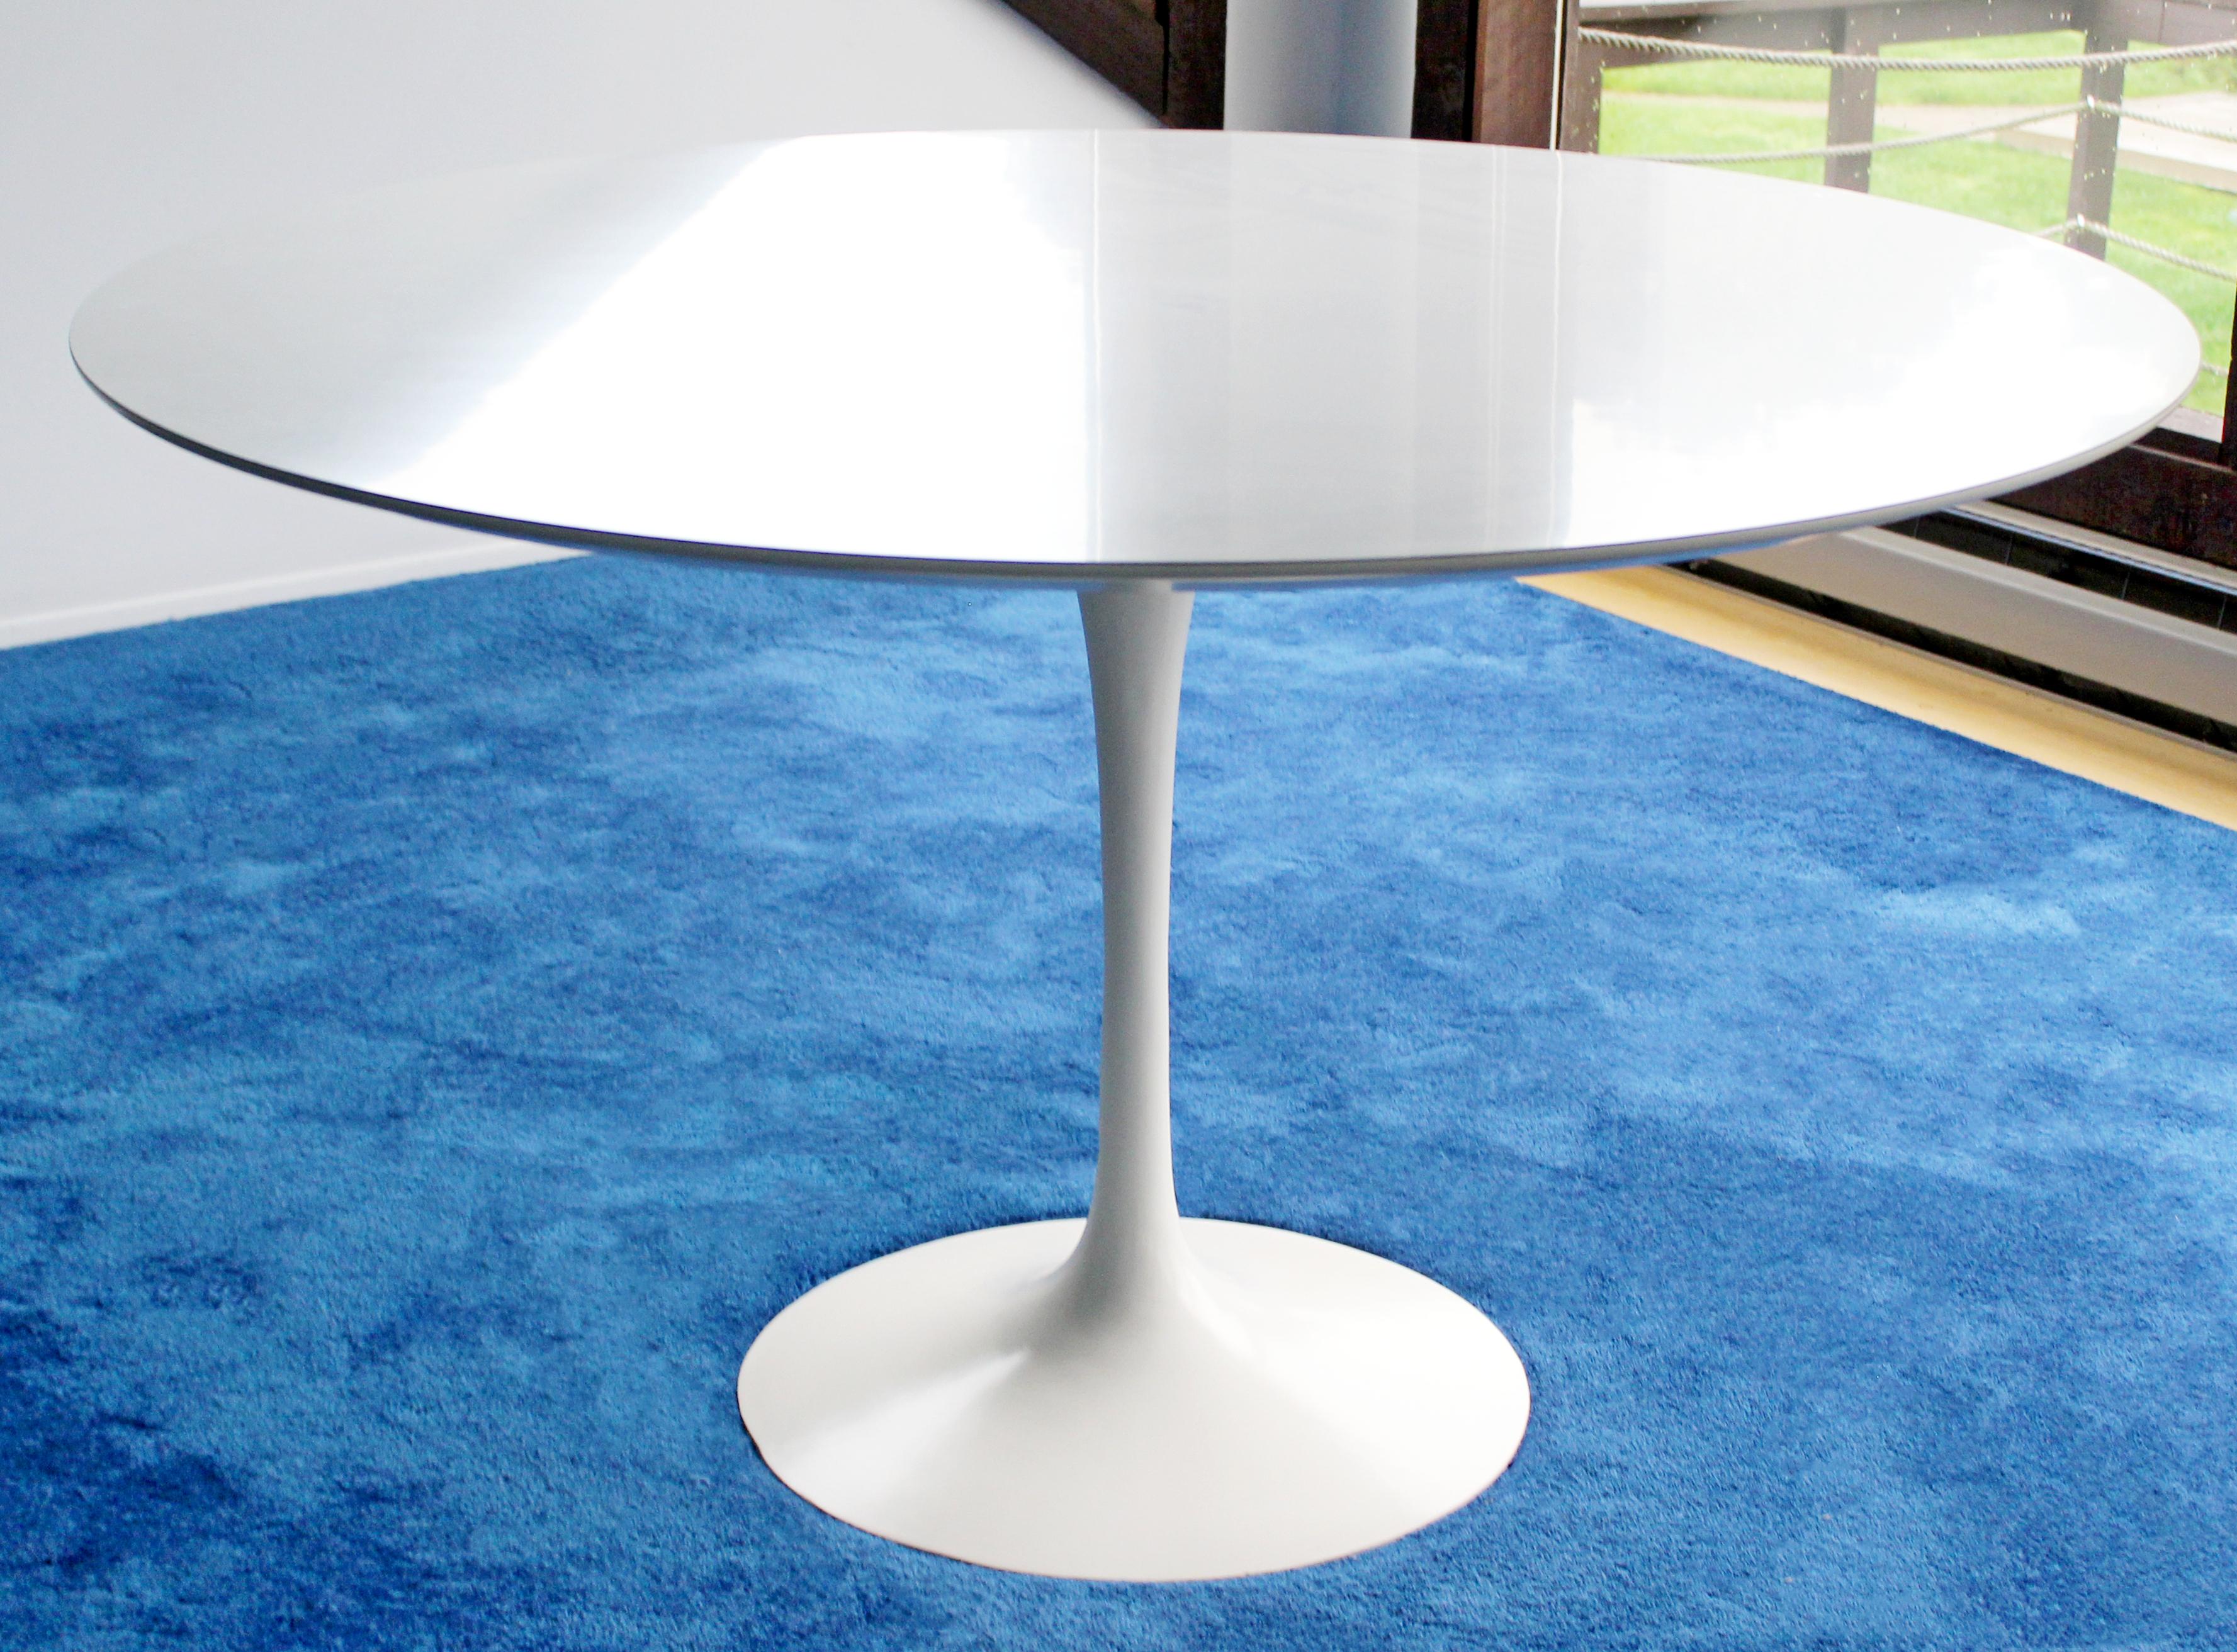 For your consideration is an original, early Tulip dining table, by Eero Saarinen for Knoll, circa 1960s. In very good vintage condition. The dimensions are 48